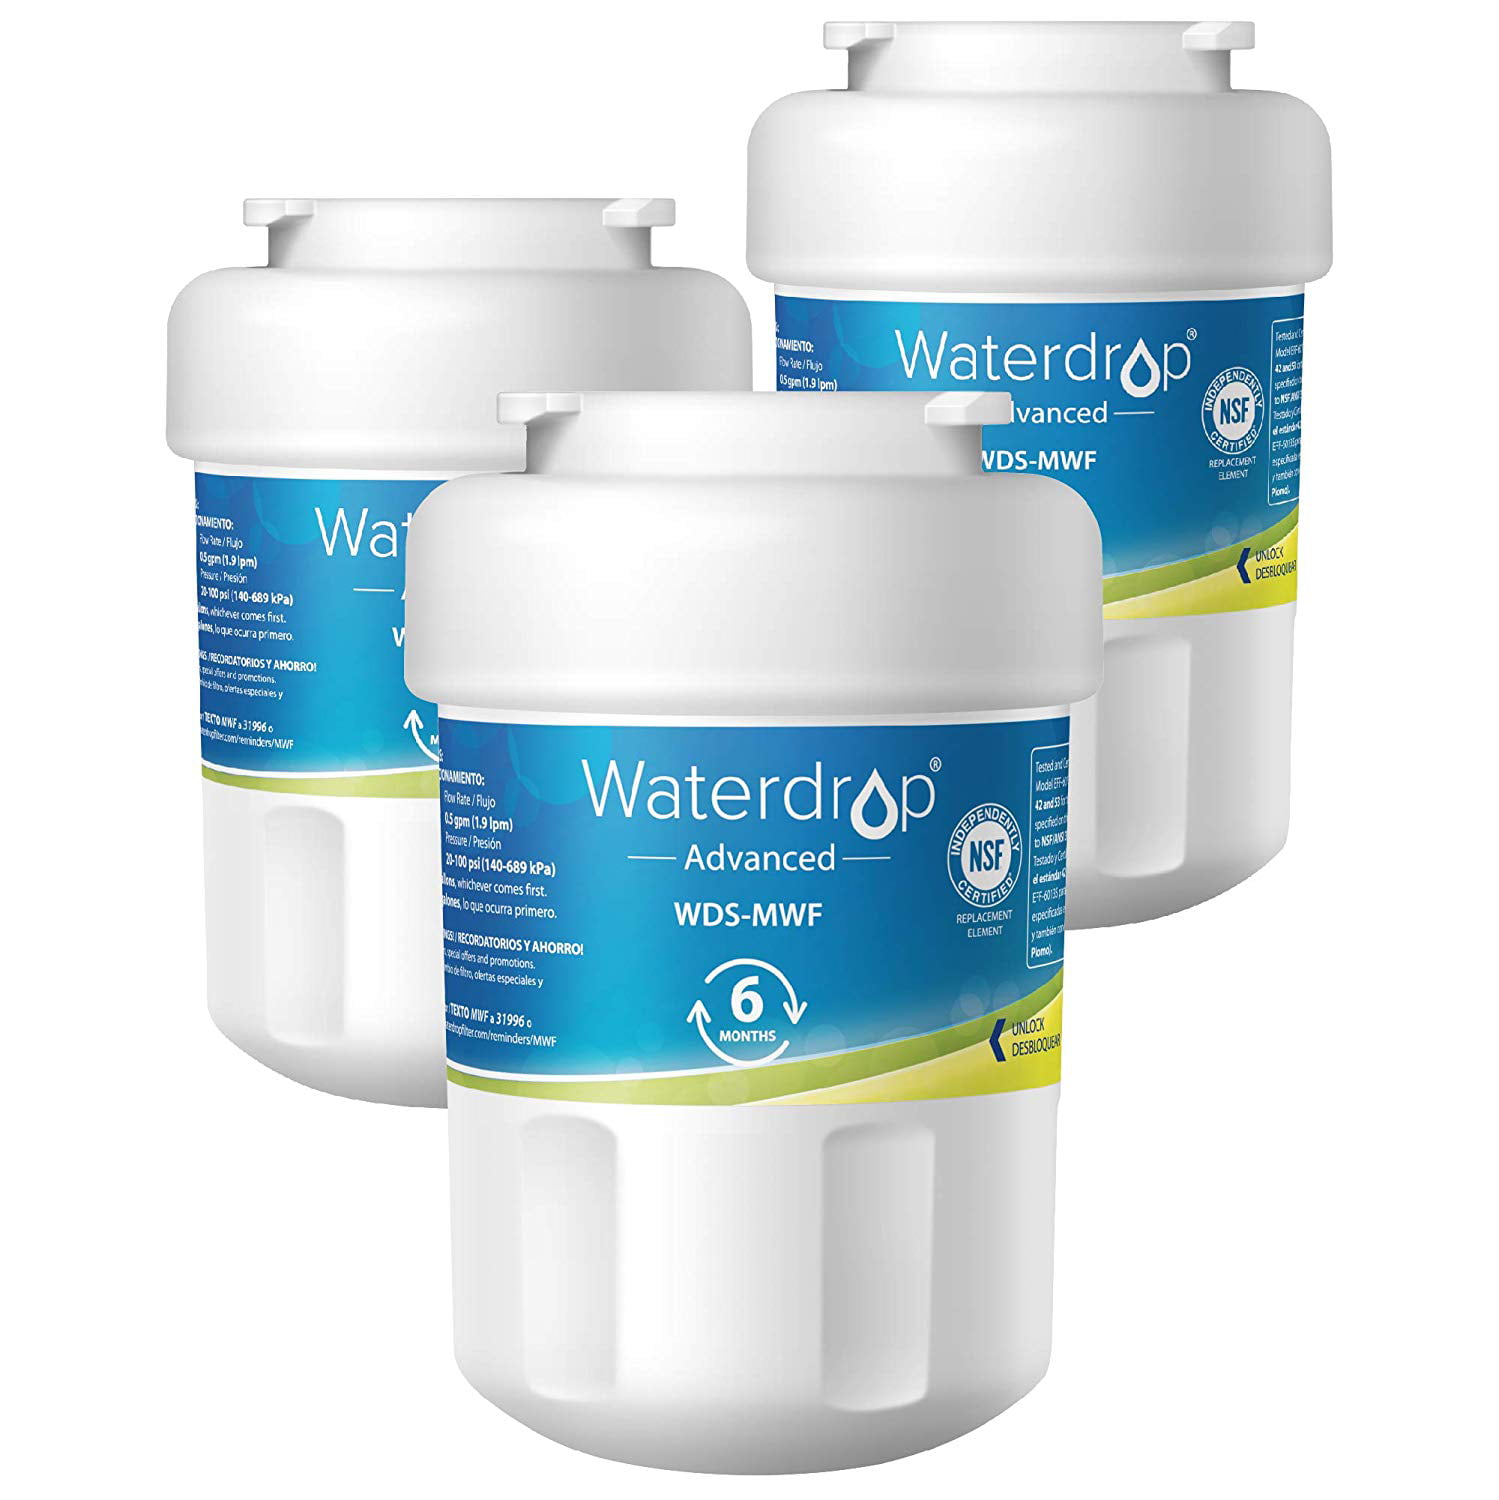 GSE25GSHECSS MWFINT HDX FMG-1 Overbest MWF Water Filter WFC1201 RWF1060 Replacement for GE Smart Water MWF Kenmore 9991 MWFP MWFA 197D6321P006 GWF